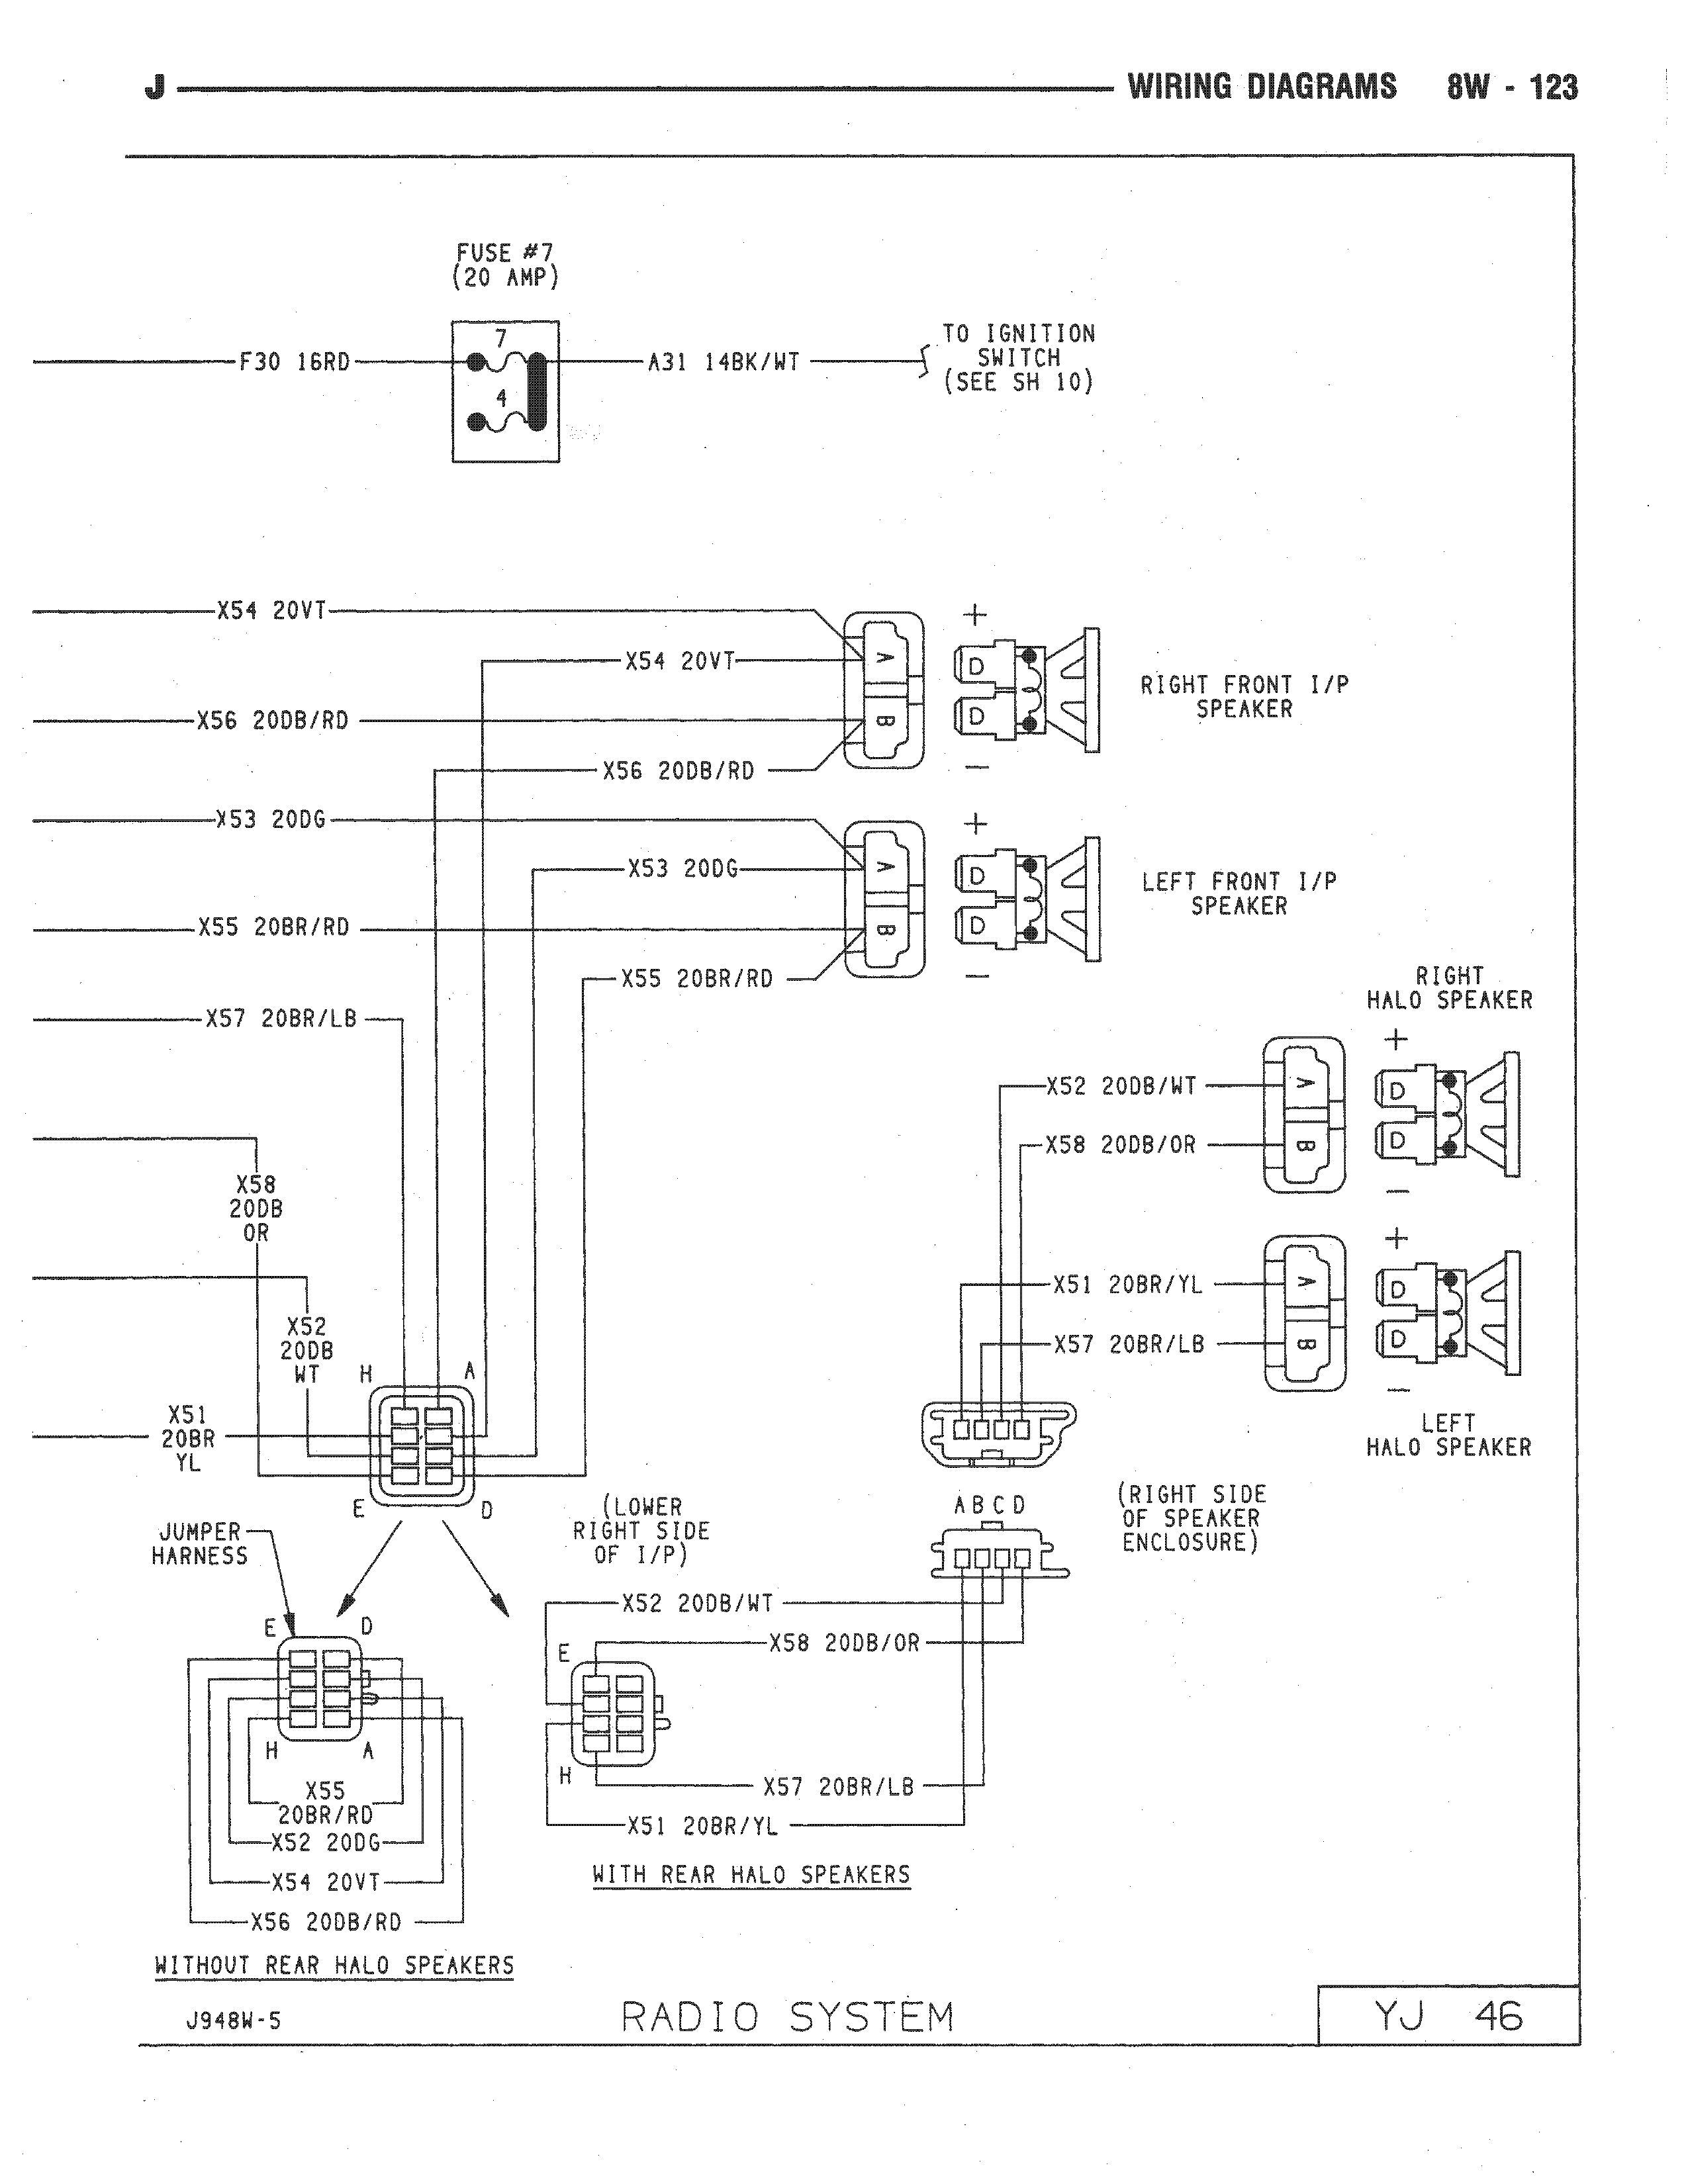 wiring diagrams for jeep wrangler wiring diagrams favorites 2009 jeep wrangler diagrams jk